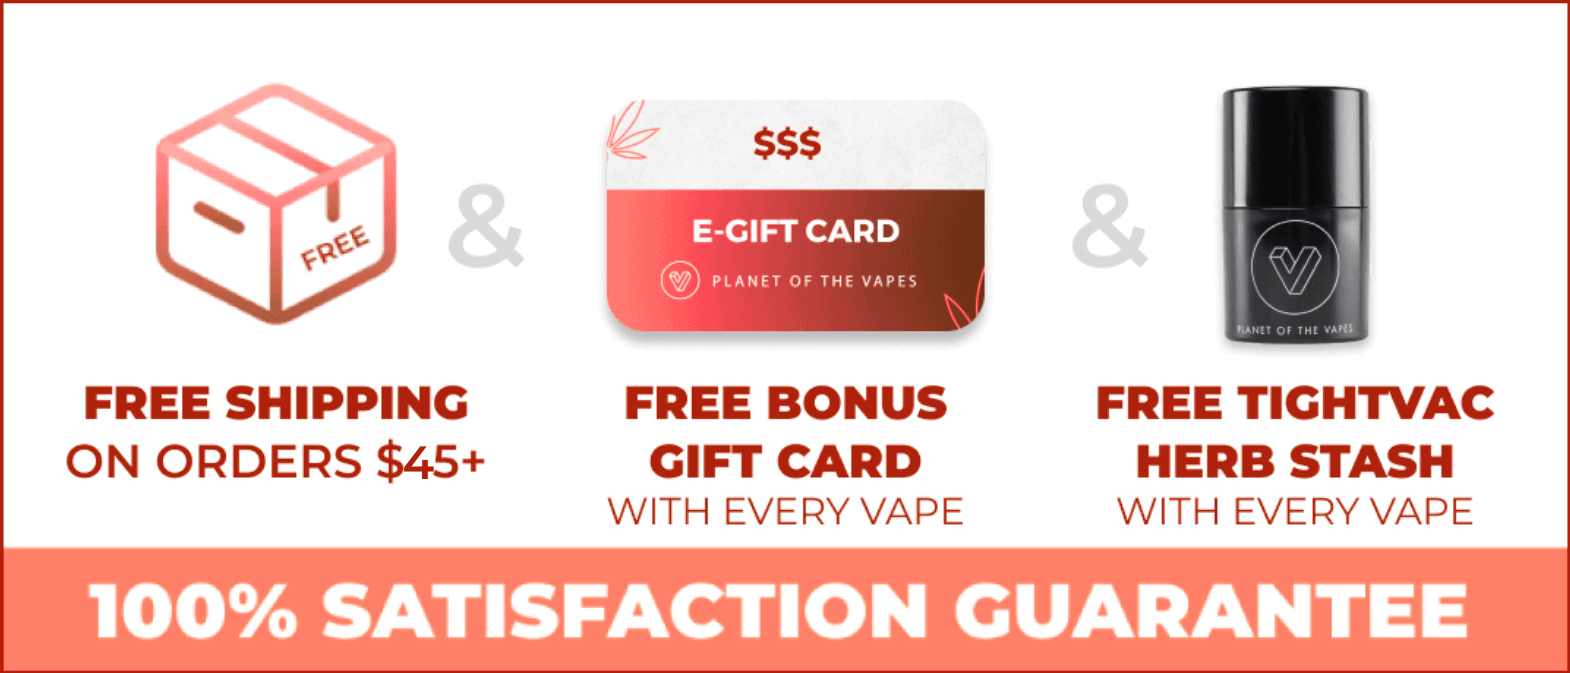 Shop now & get free shipping on orders over \\$45, free bonus gift card with every vape, & a free TightVac